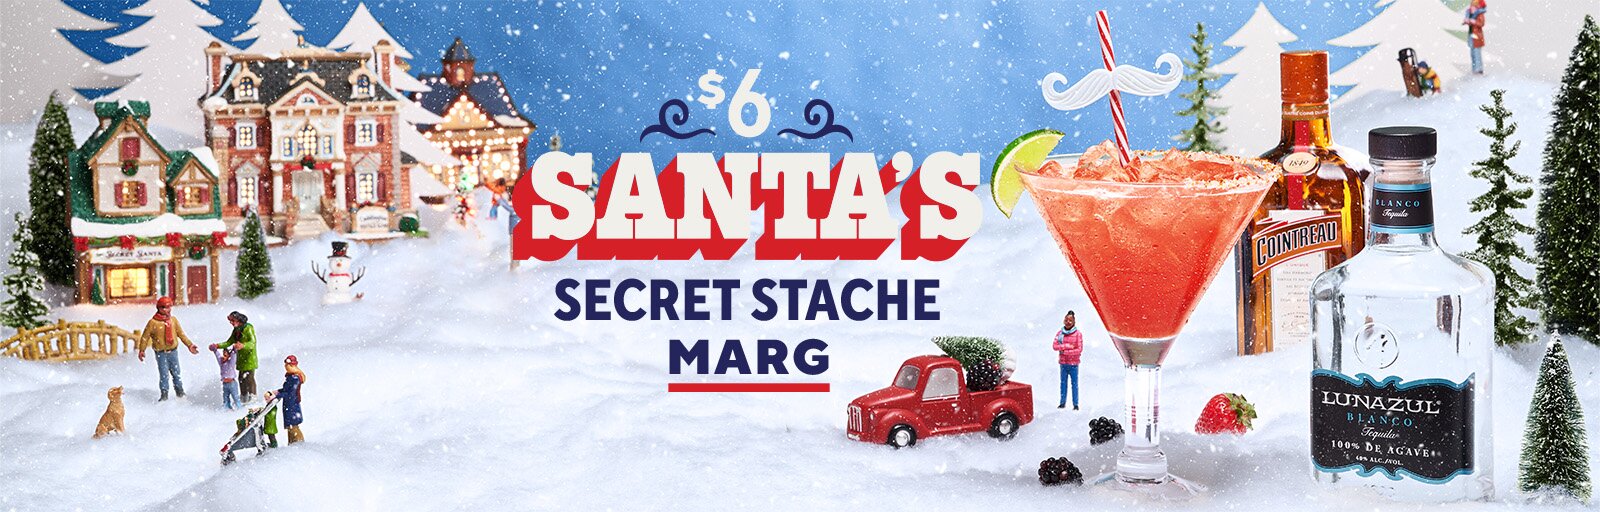 Chili's December Margarita of the Month, Santa's Secret Stache Marg, in a glass with bottles.